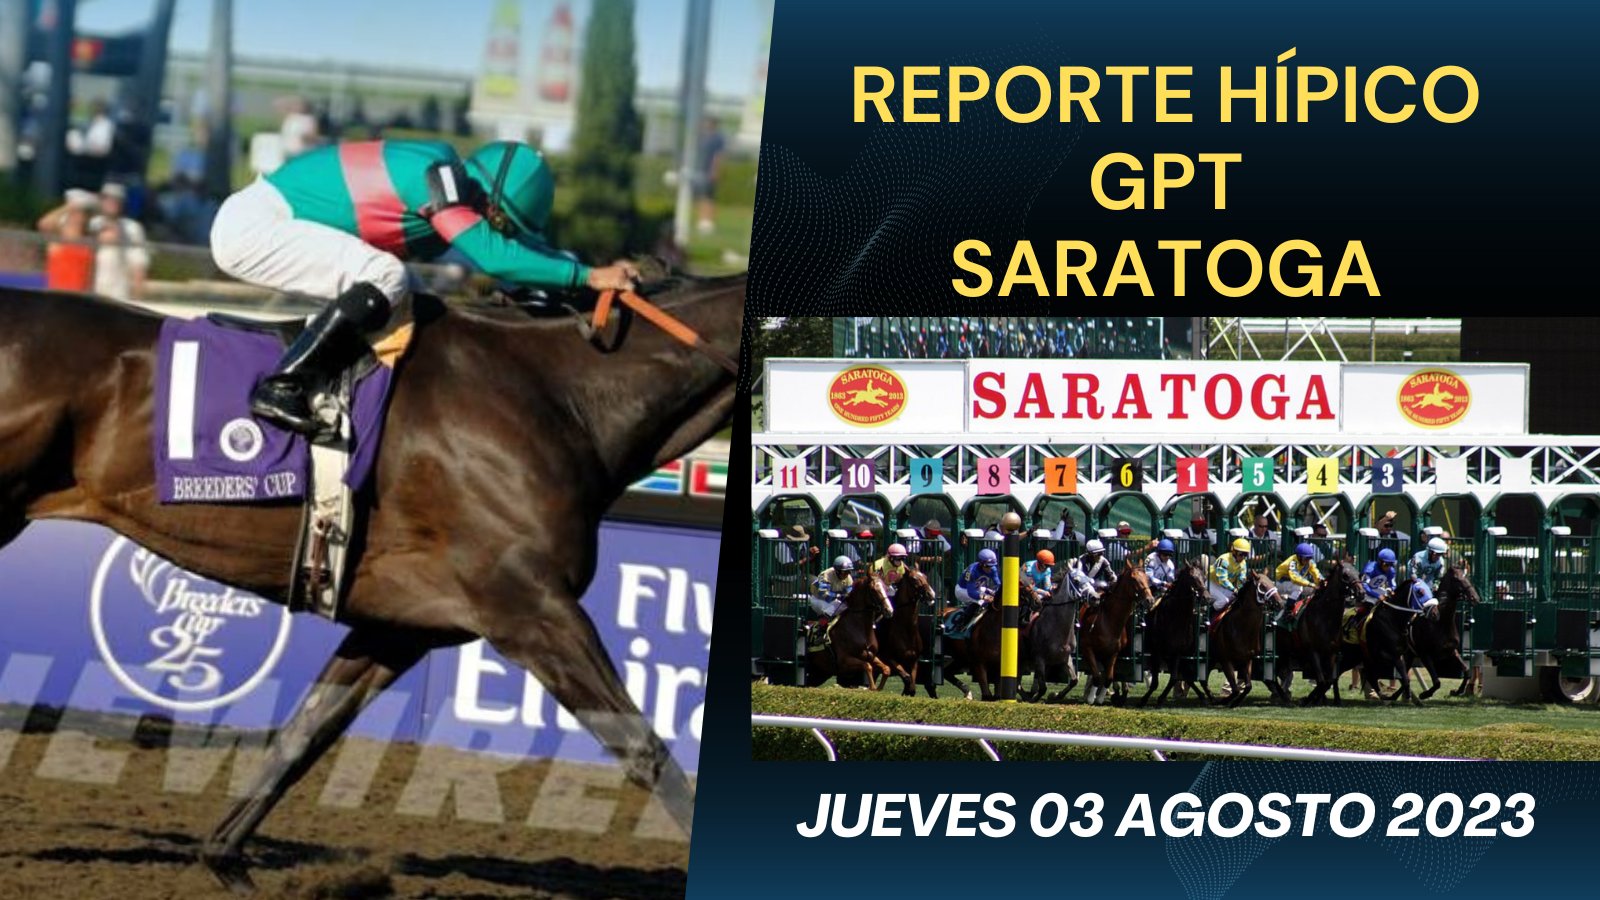 *****REPORTE HIPICO GPT SARATOGA JUEVES 03-08-2023 ****** F2nwkszXoAYBT72?format=jpg&name=large